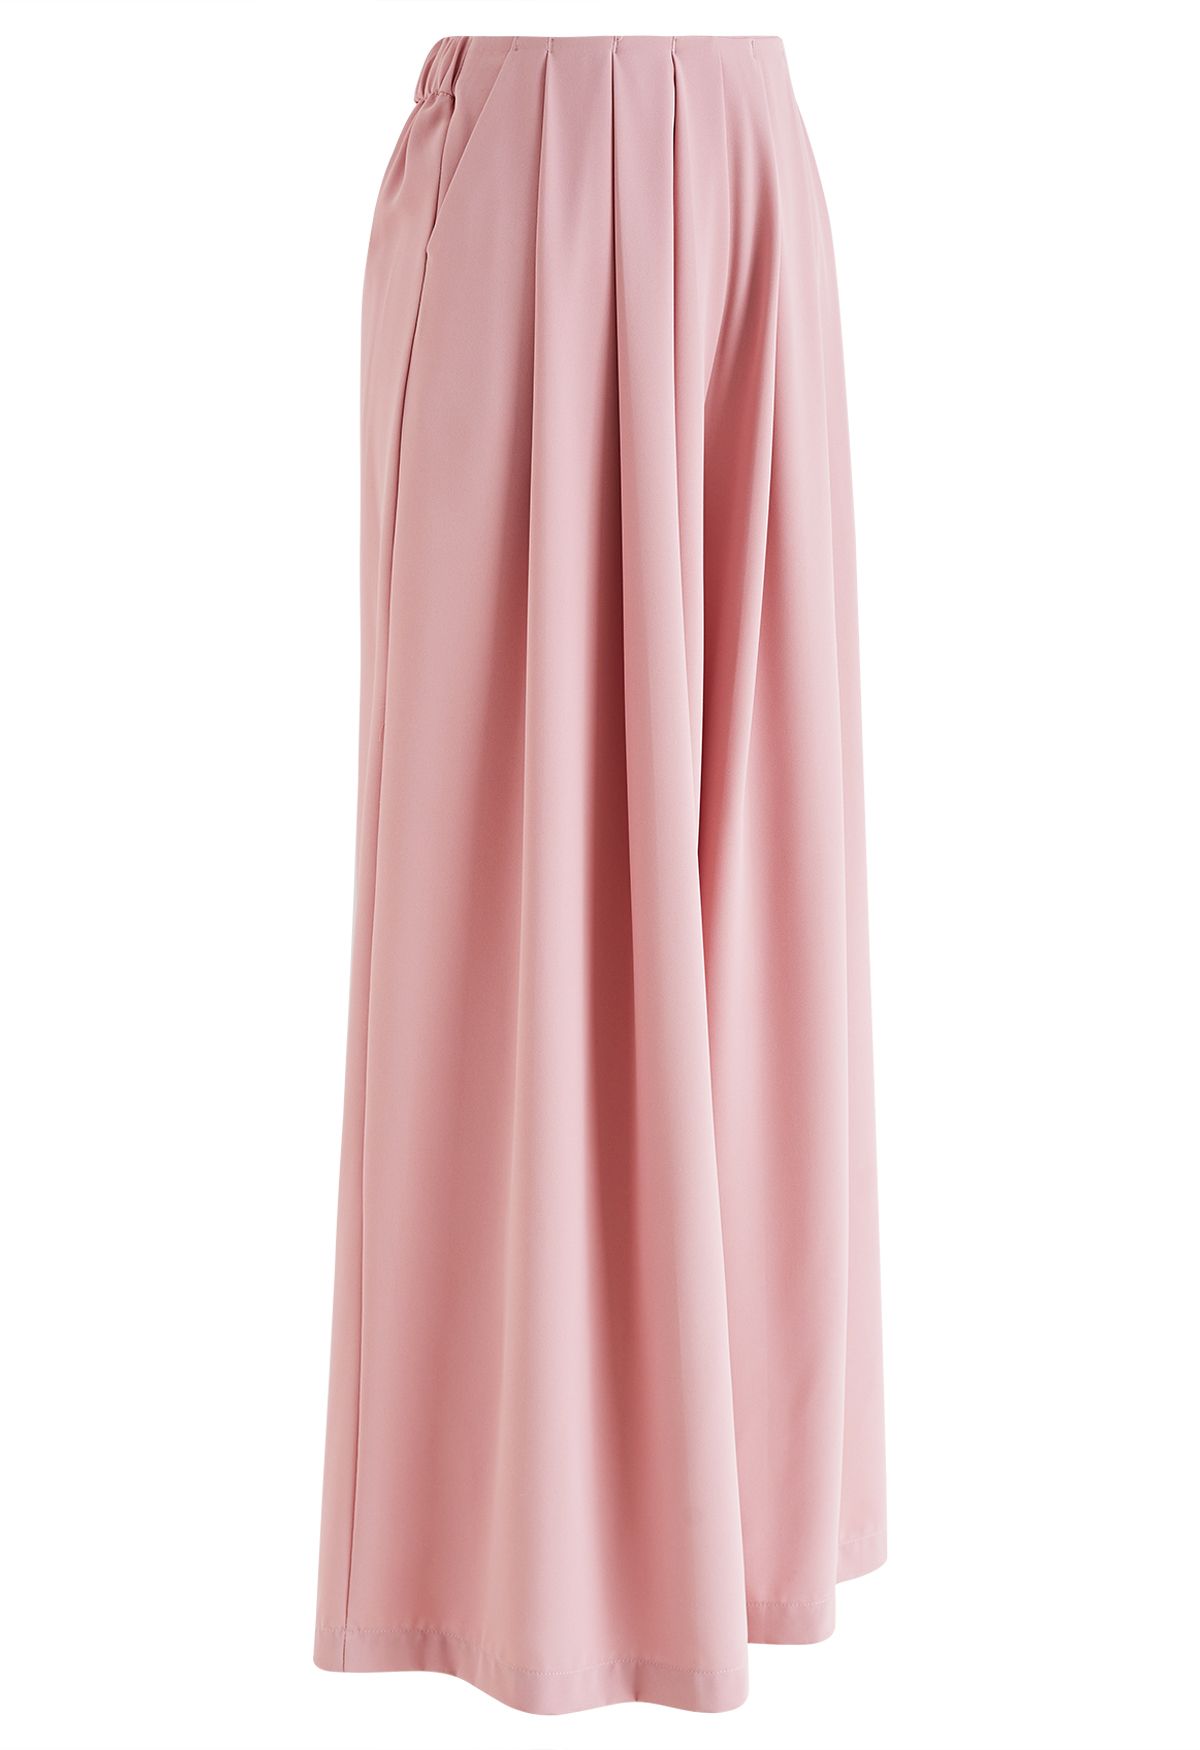 Fanciful Pleats Wide-Leg Pants in Pink - Retro, Indie and Unique Fashion